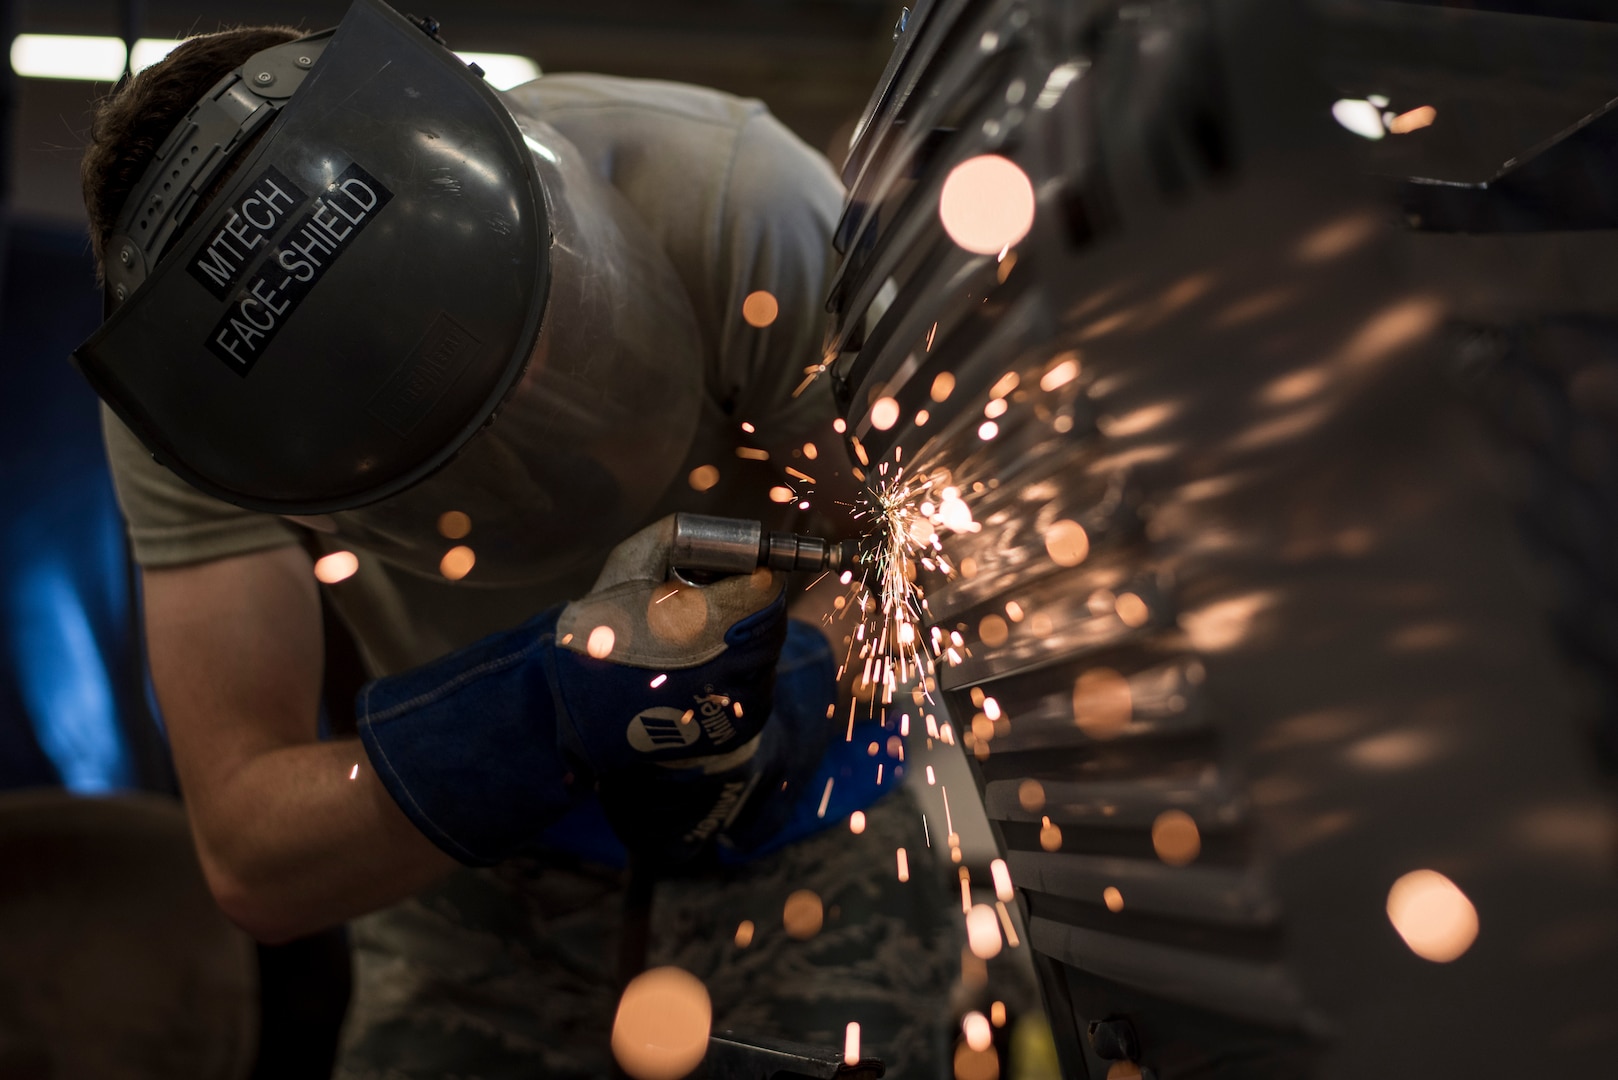 Airman 1st Class Patrick Ragan, 27th Maintenance Squadron Aircraft Metals Technology apprentice, grinds down a low-pac cover at Cannon Air Force Base, New Mexico, June 21, 2017. The cover had hair-line cracks that first needed to be filled before they were smoothed out with the grinder. (U.S. Air Force photo by Staff Sgt. Michael Washburn/Released)